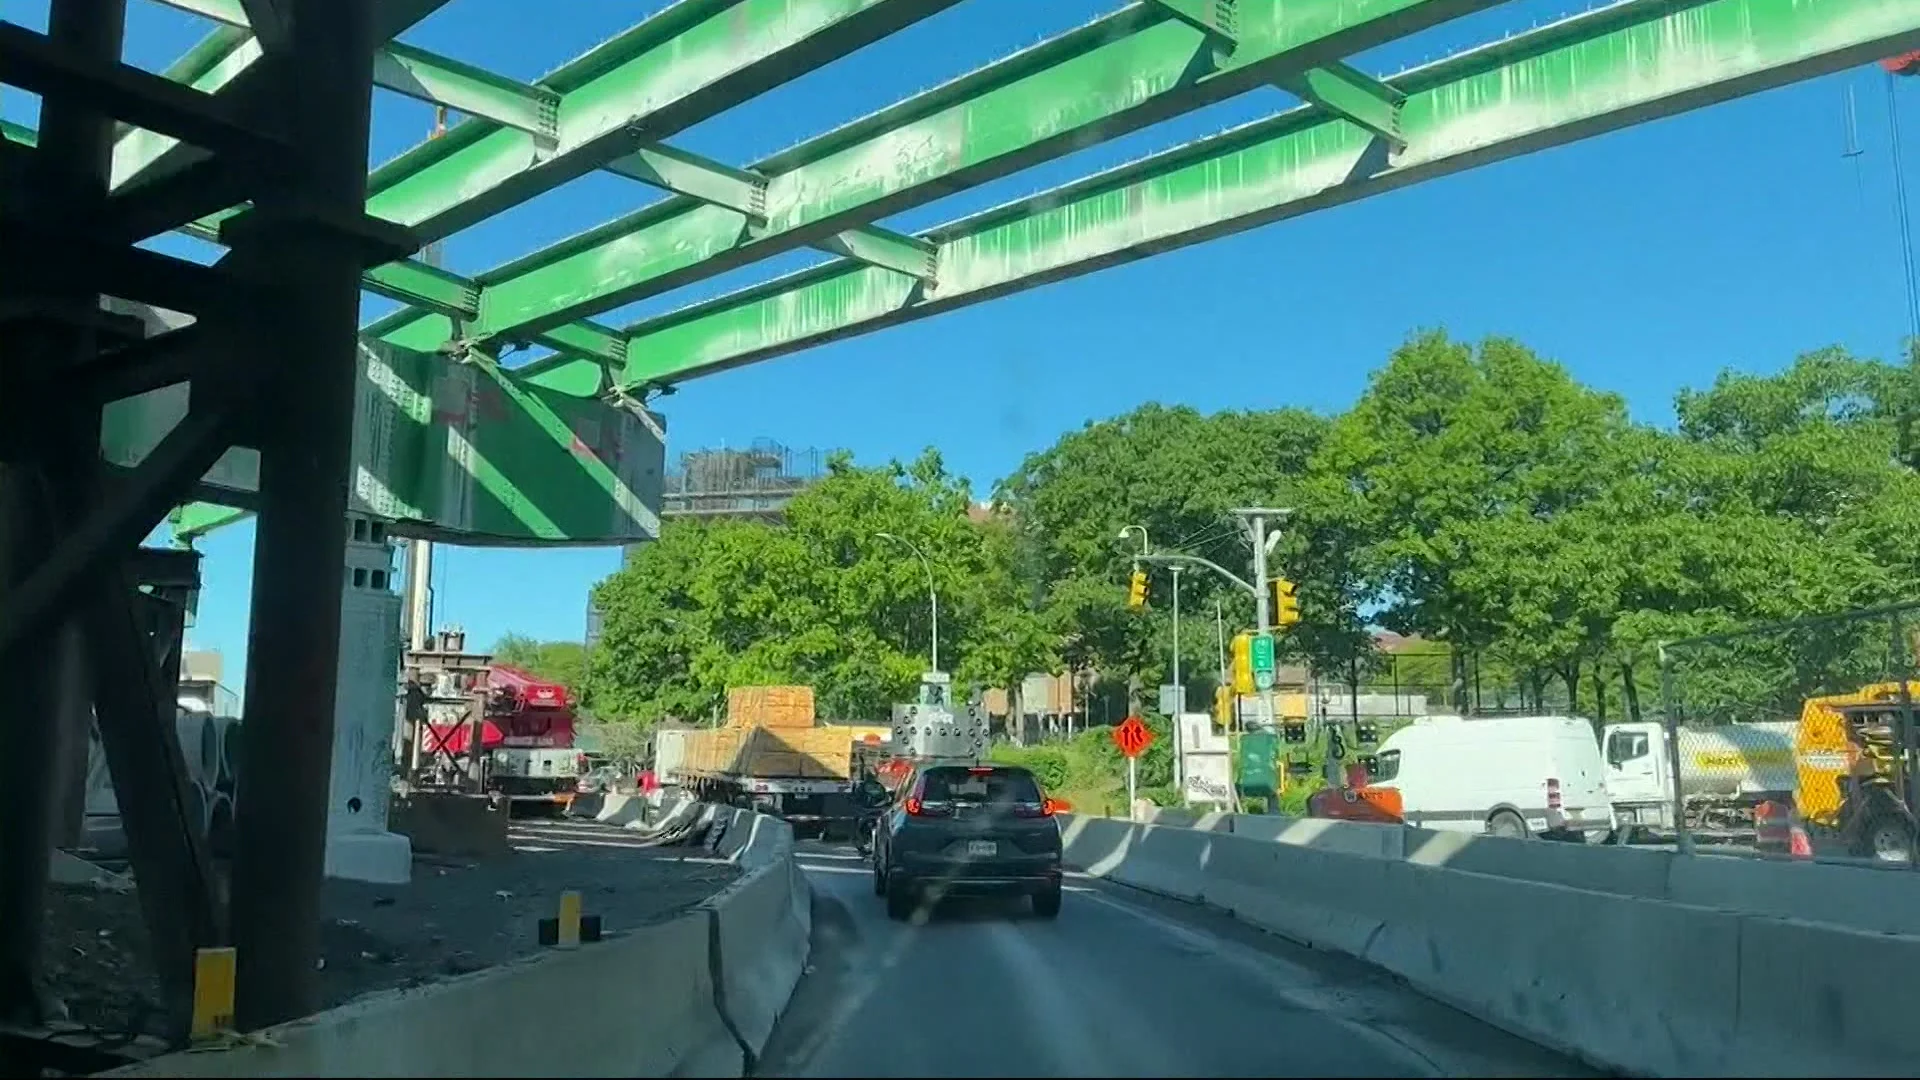 Bruckner Expressway closures: State urges drivers to use caution near work zones